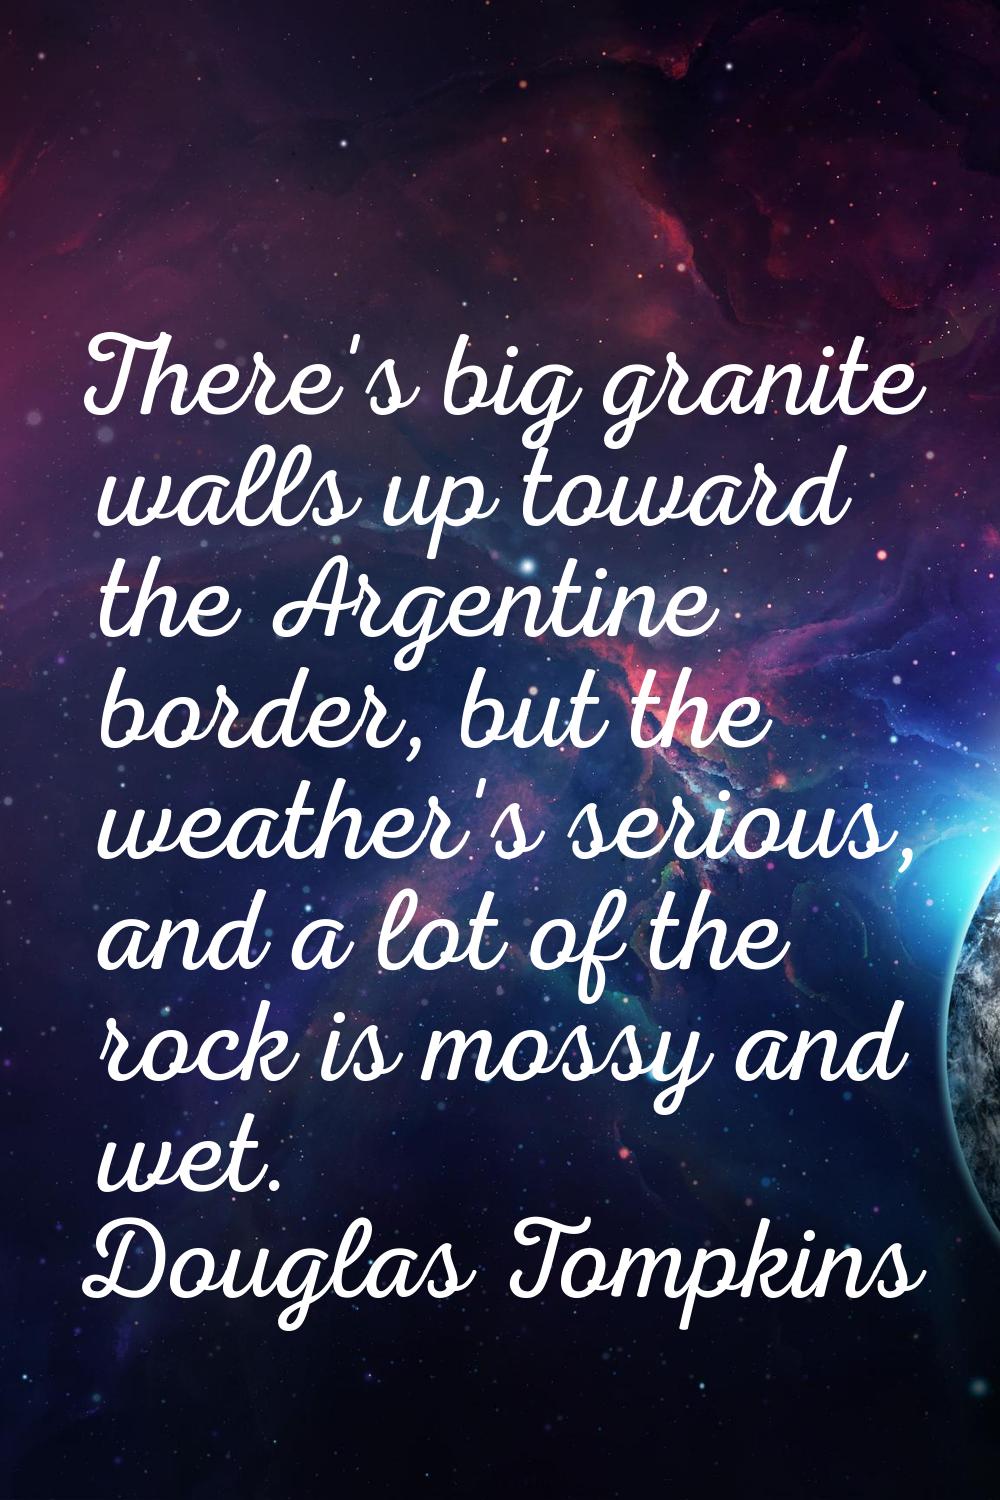 There's big granite walls up toward the Argentine border, but the weather's serious, and a lot of t